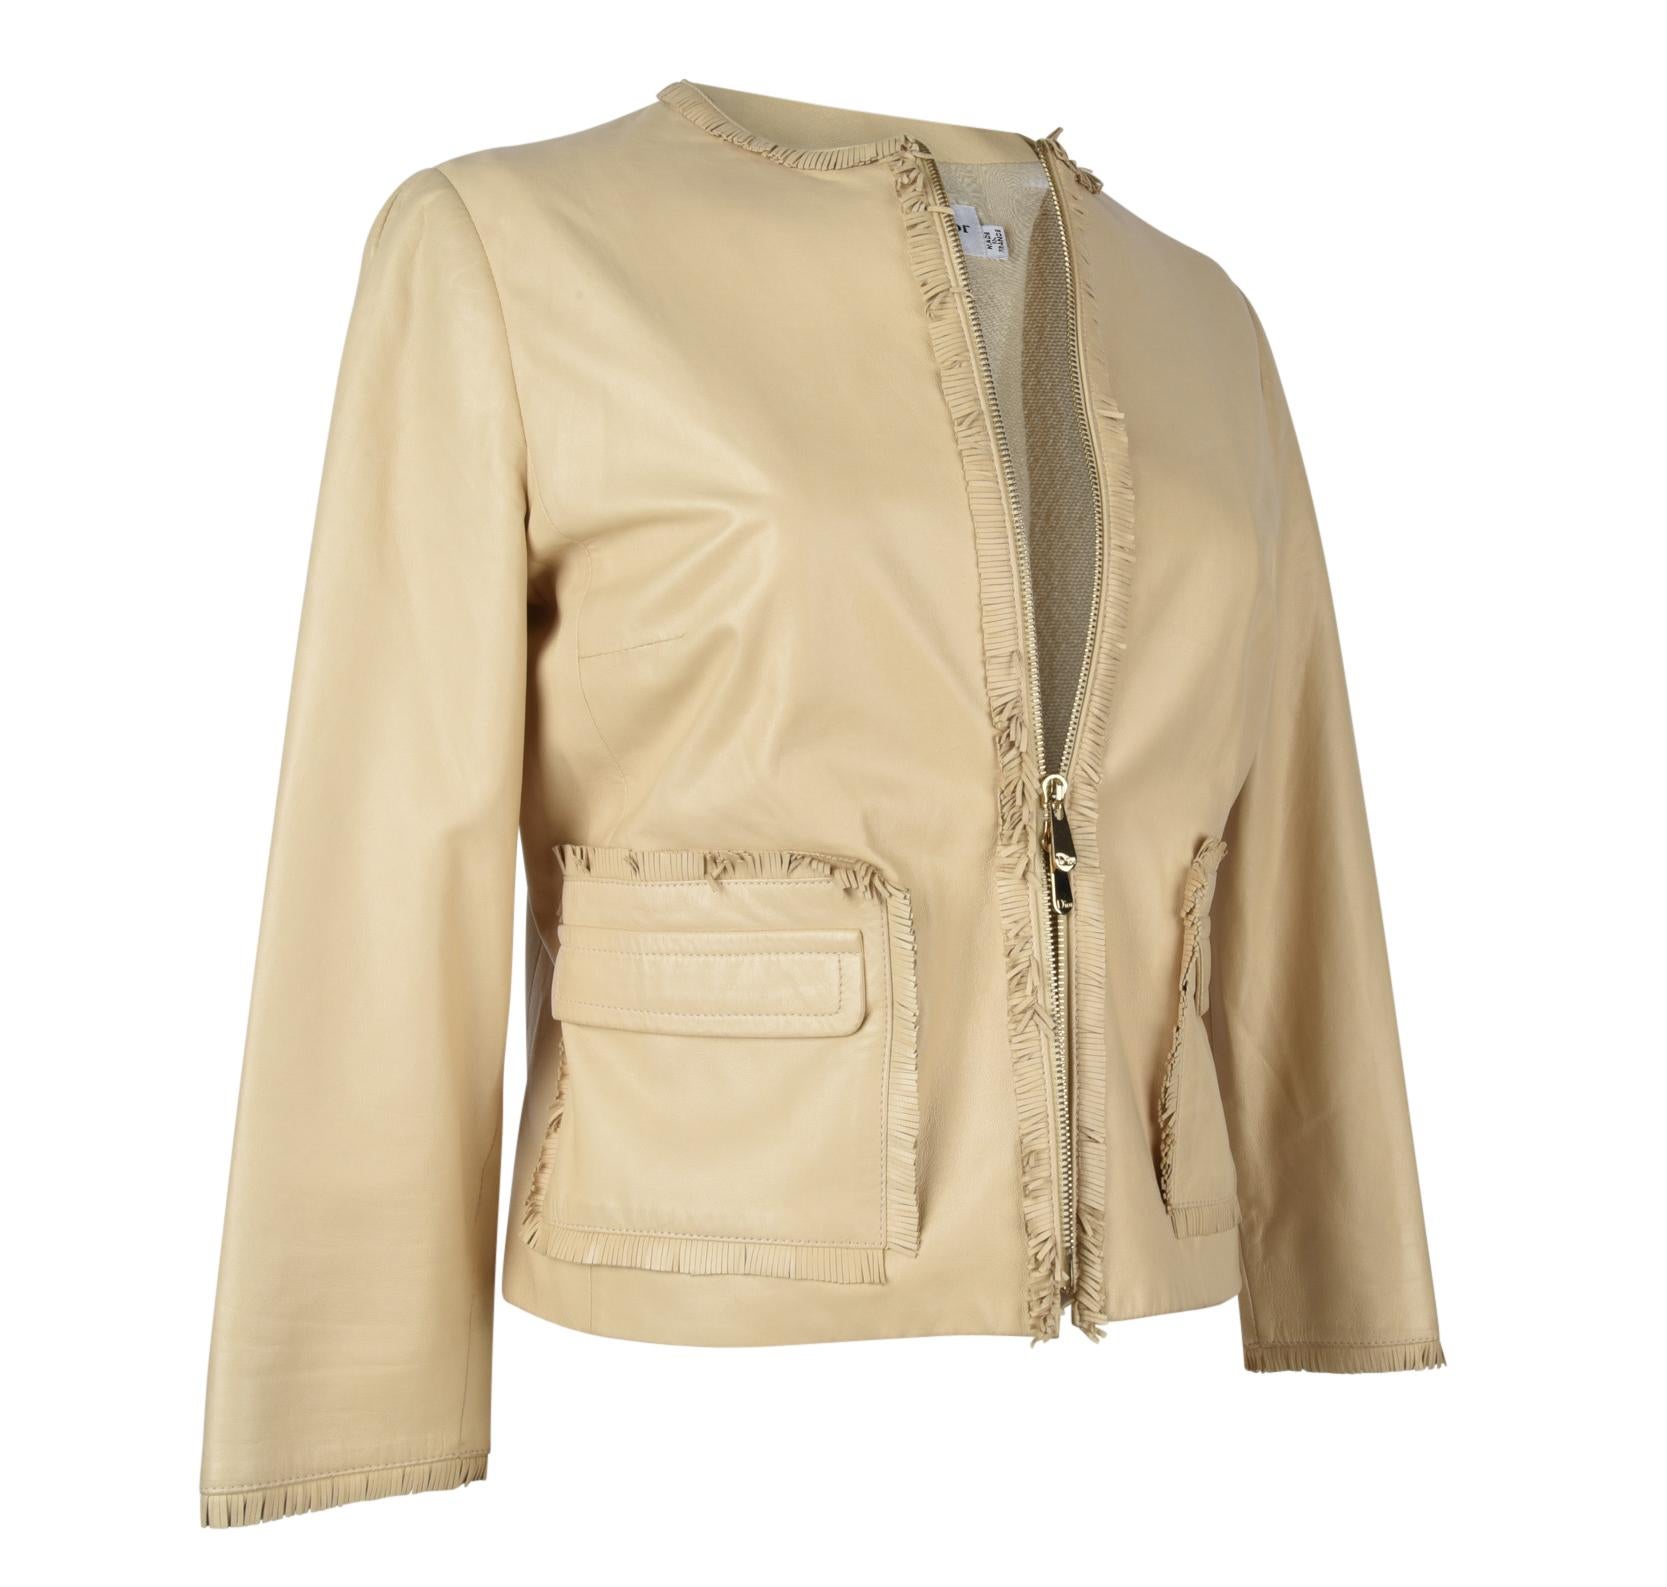 Guaranteed authentic Christian Dior lambskin leather jacket in pale butter yellow.  
Front zip with embossed pull.
Jacket is trimmed with a small fringe around neck, down front and around pockets.
2 patch flap pockets.
Lined in silk. 
final